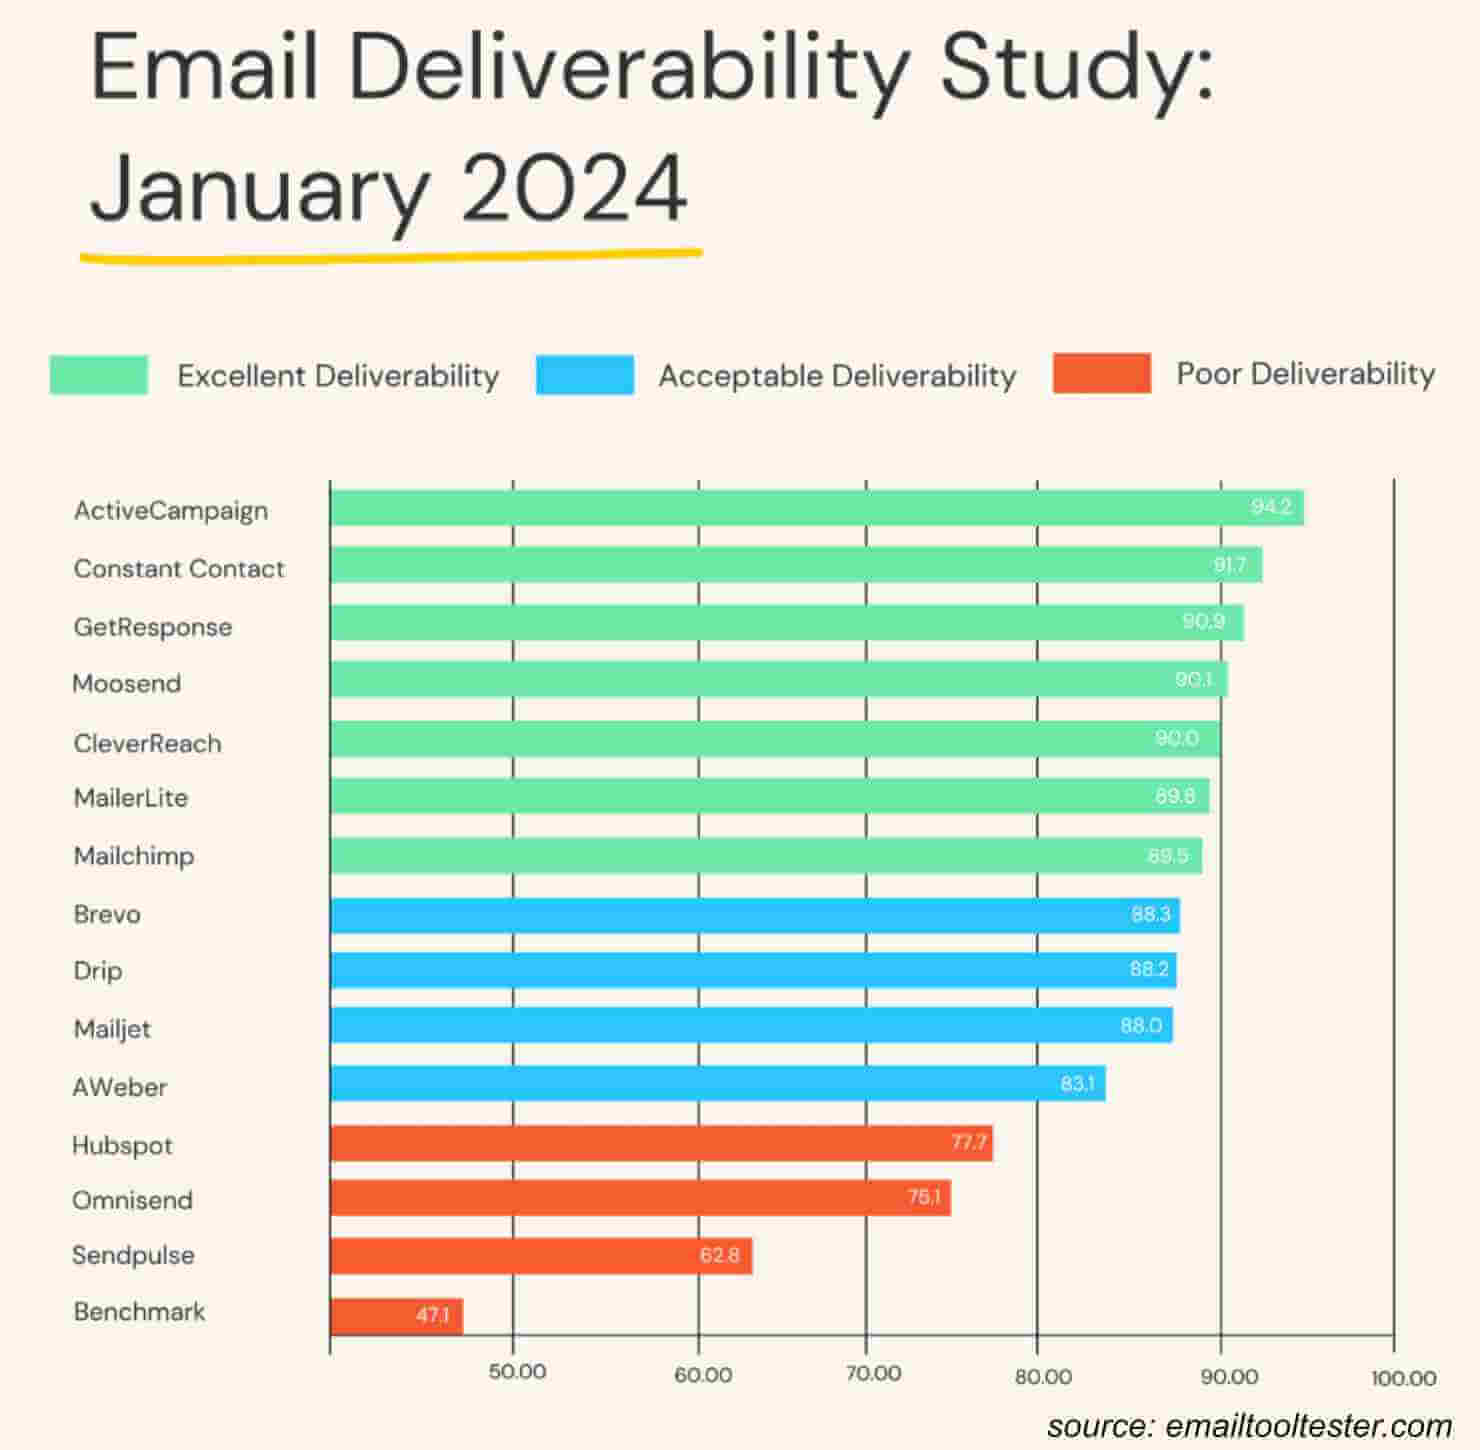 Email Deliverability study January 2024. Excellent Deliverability: ActiveCampaign, Constant Contact, GetResponse, Moosend, CleverReach, MailerLite, Mailchimp. Acceptable Deliverability: Brevo, Drip, Mailjet, AWeber. Poor Deliverability: Hubspot, Omnisend, Sendpulse, Benchmark. Source: emailtooltester.com